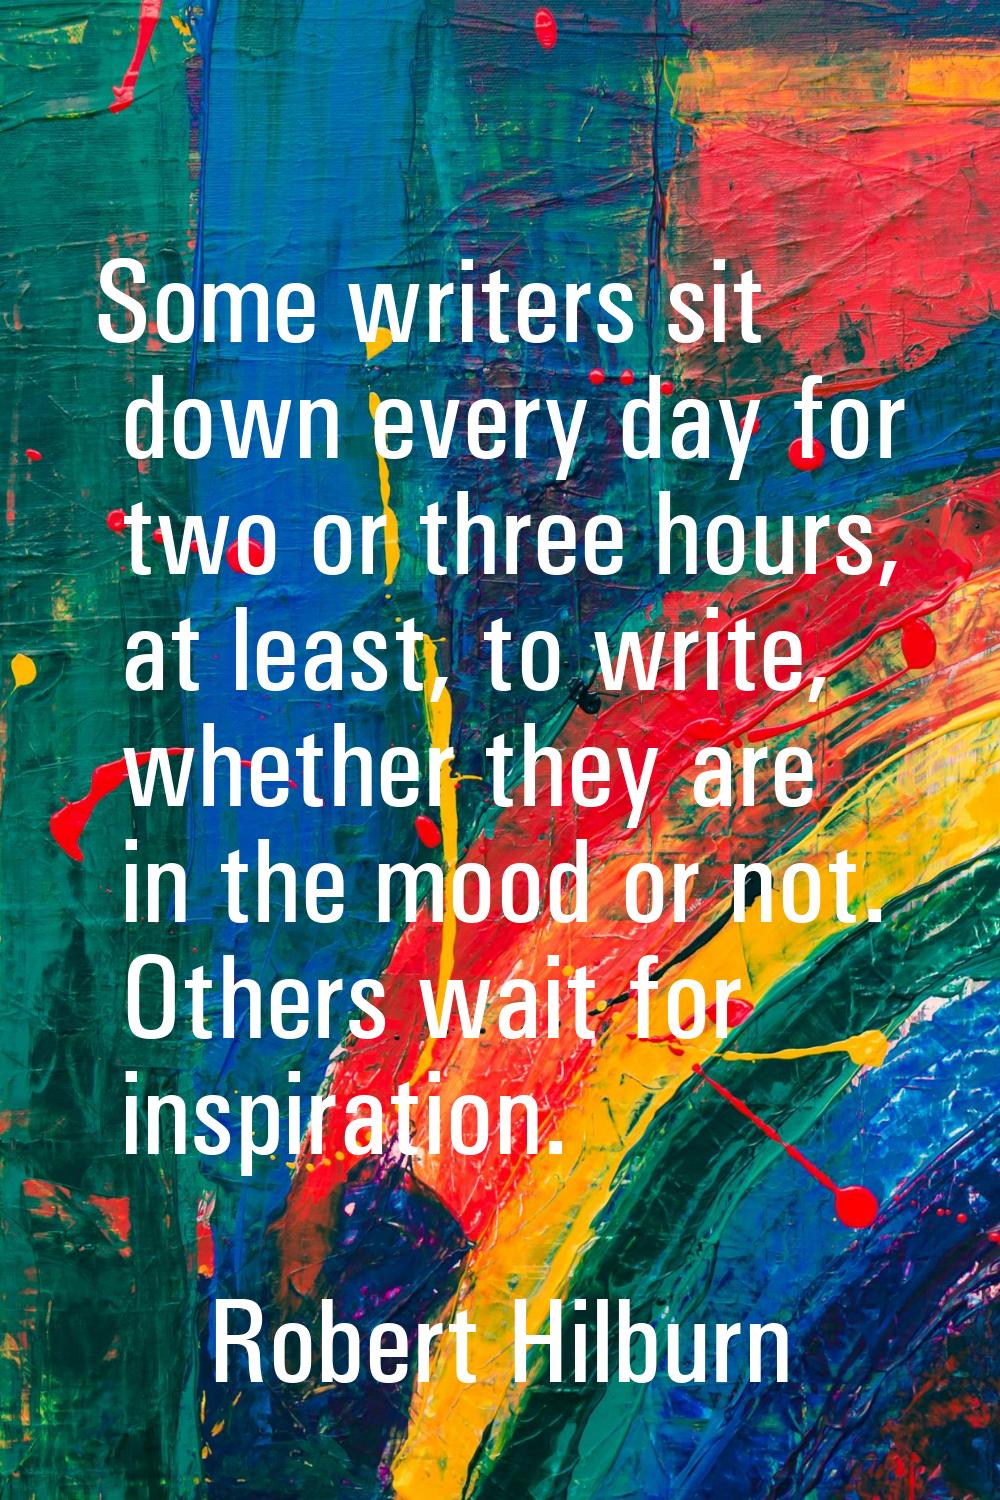 Some writers sit down every day for two or three hours, at least, to write, whether they are in the